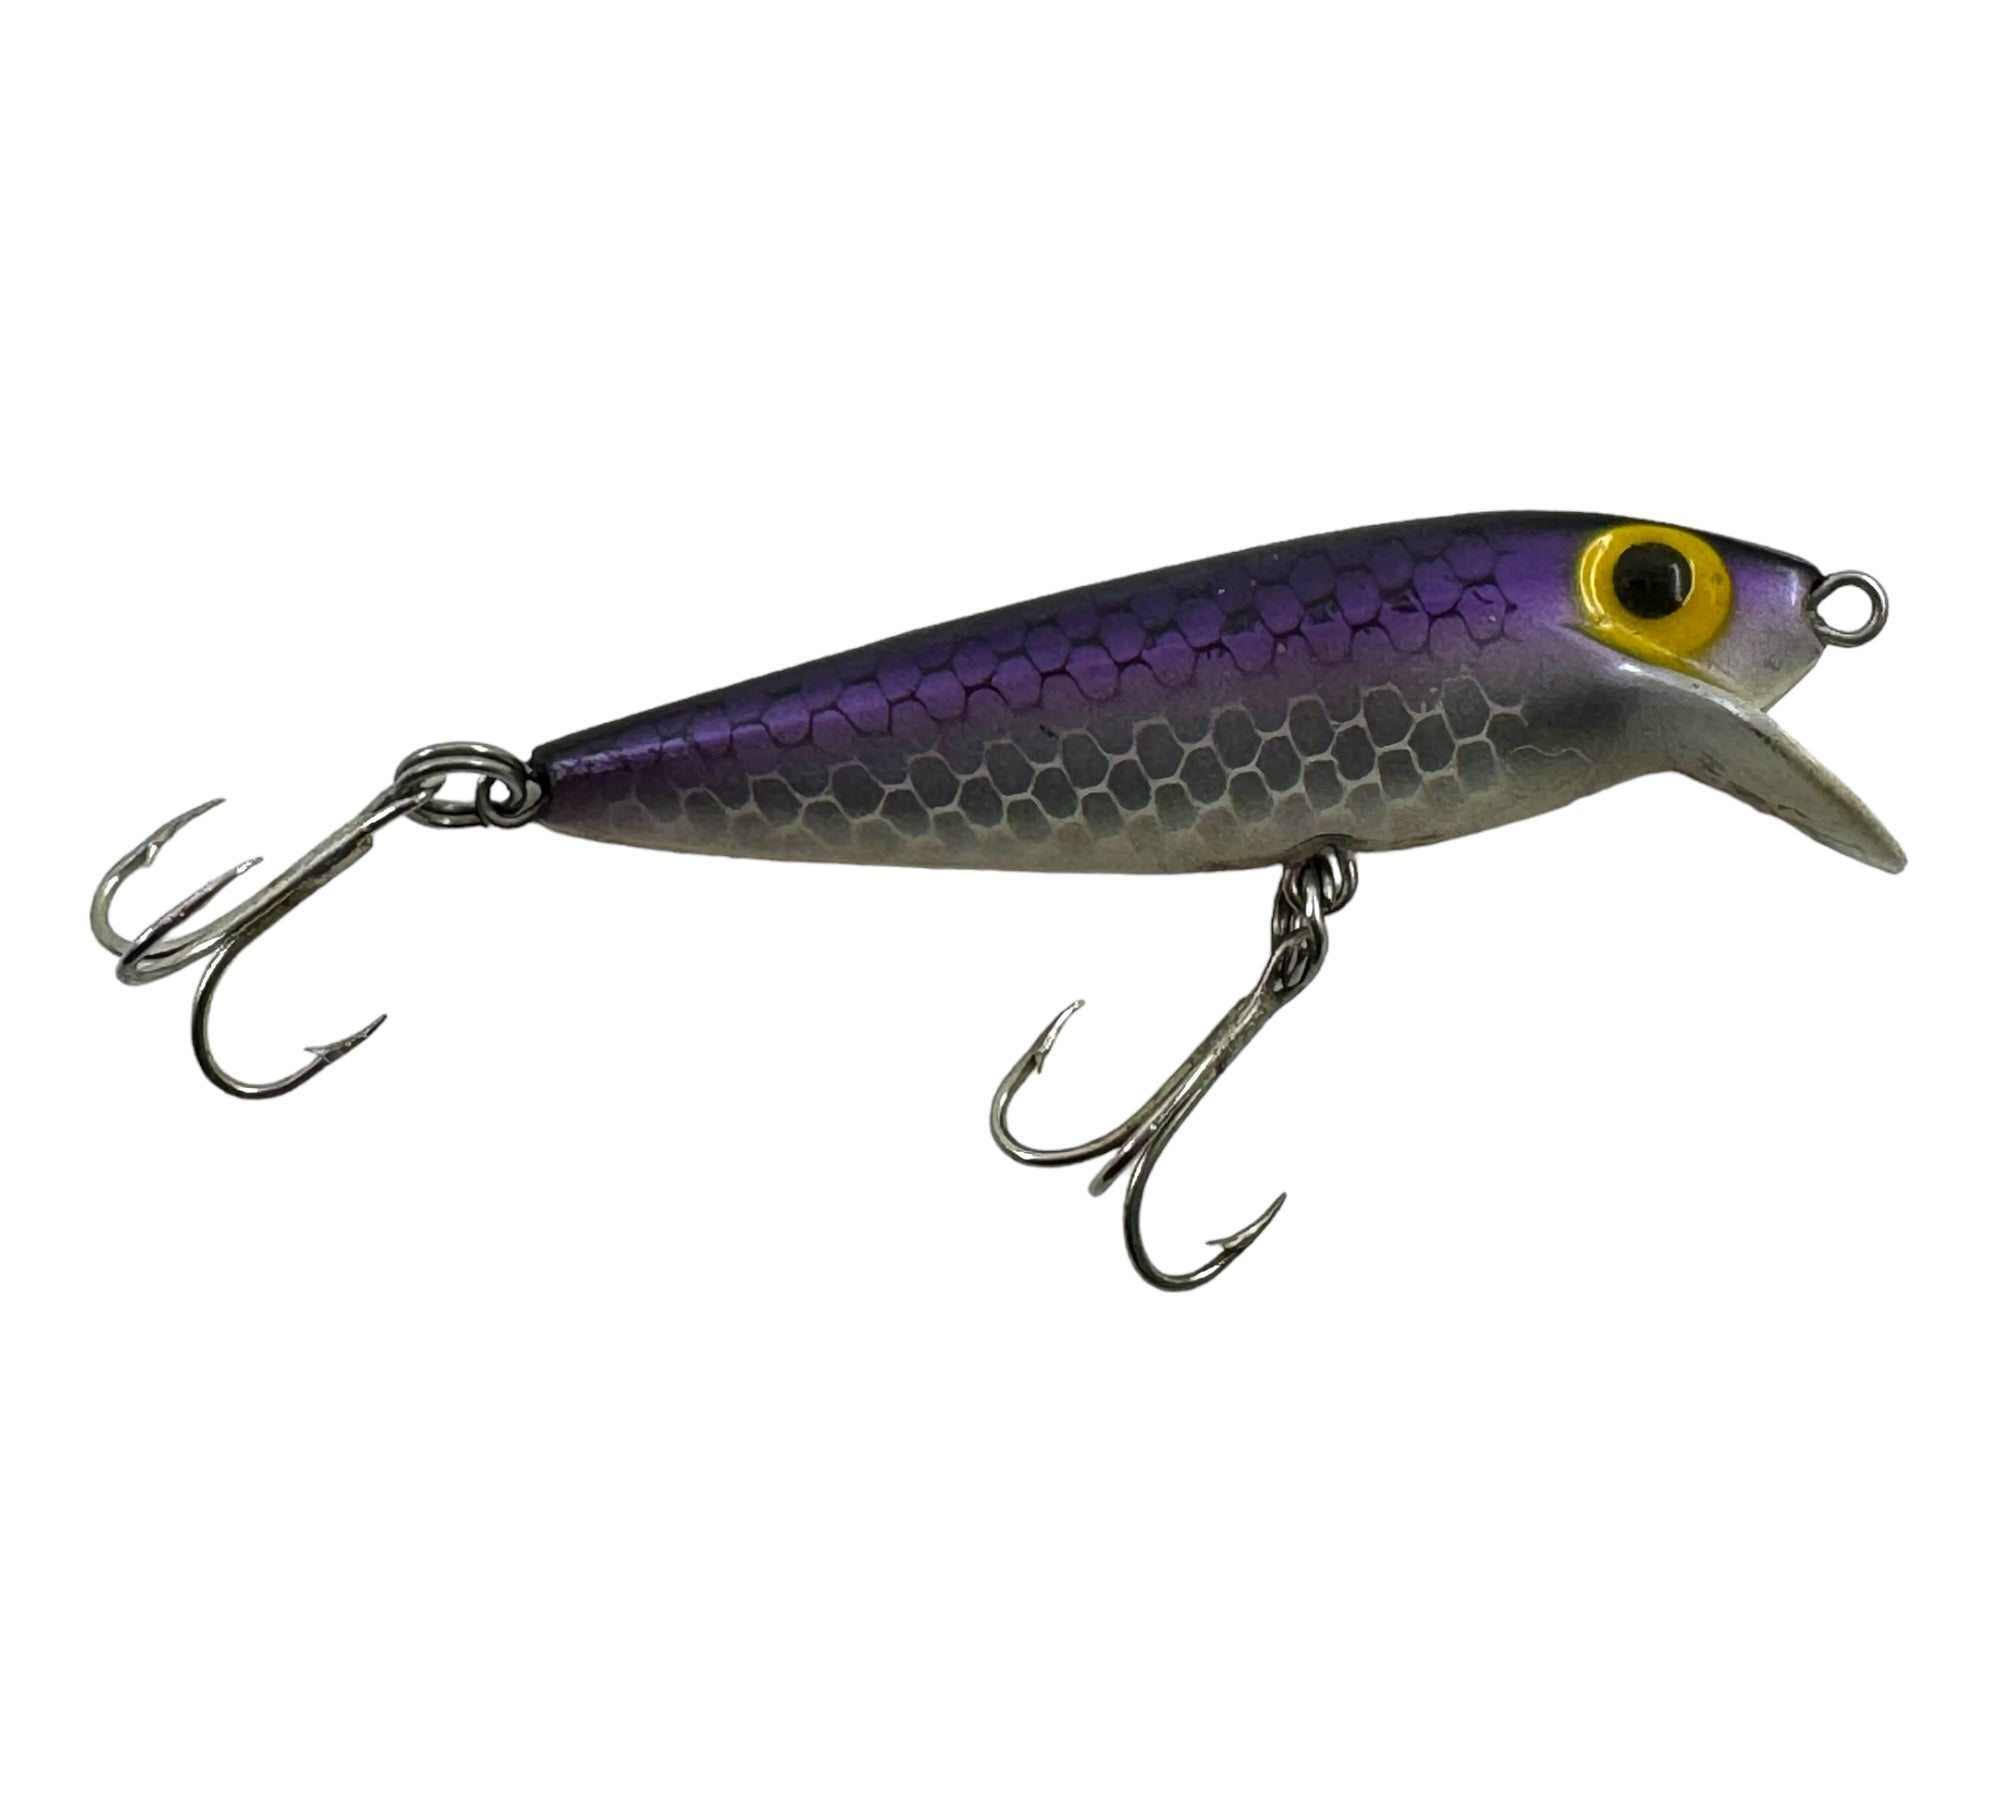 RED LABEL • STORM LURES Thin Fin SHINER MINNOW Fishing Lure – Toad